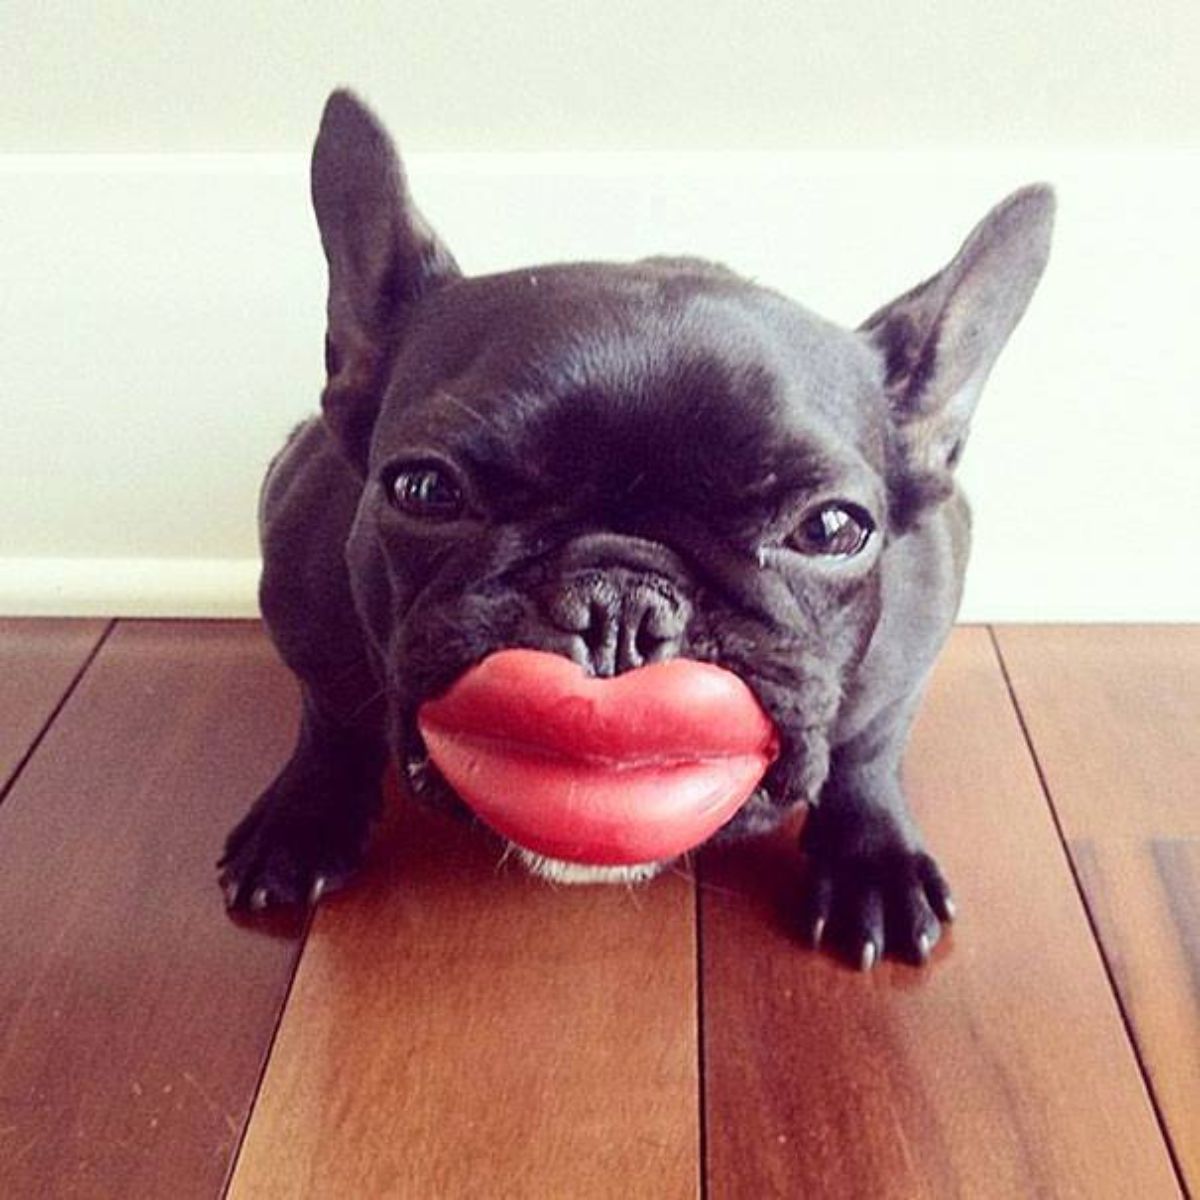 black french bulldog with a red lip toy on the mouth